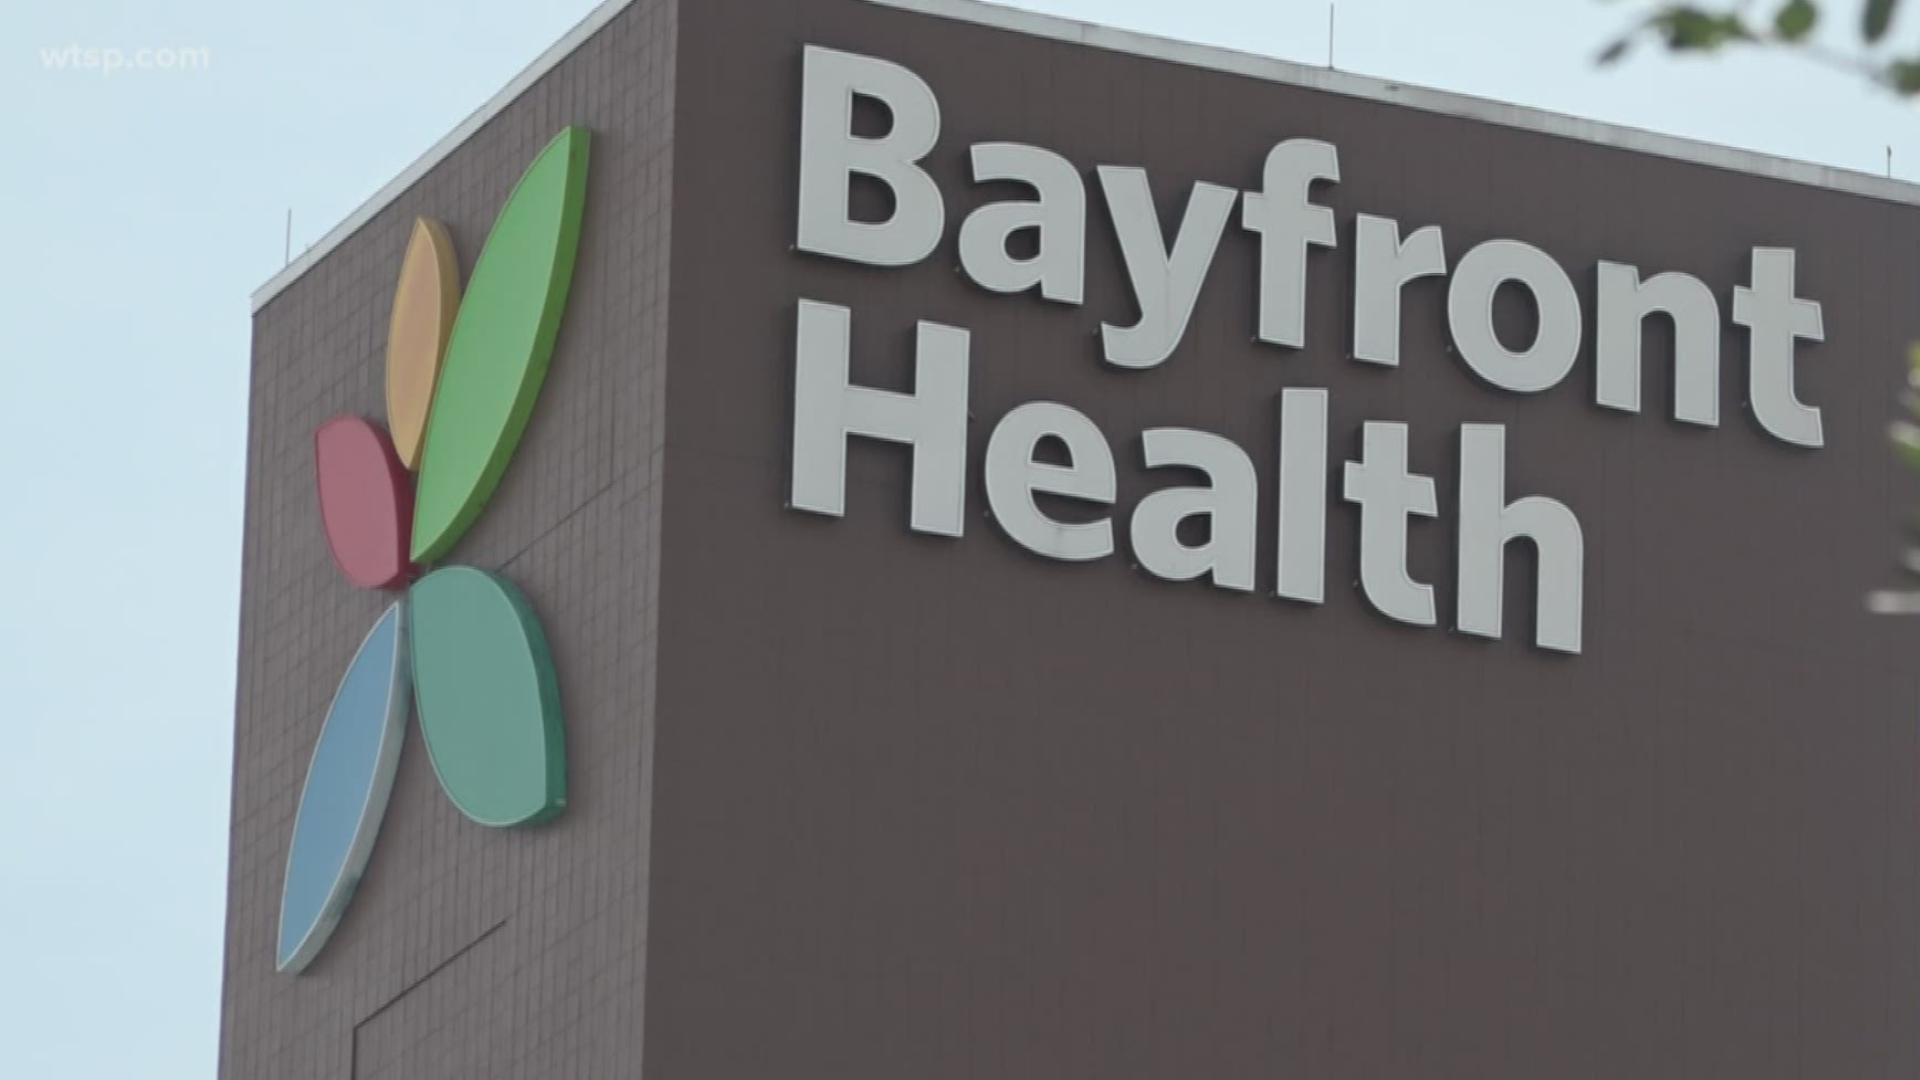 St. Petersburg city council is still waiting on answers from Bayfront Hospital after the regional CEO of Bayfront Health gave a presentation earlier this month. https://on.wtsp.com/2P5j035